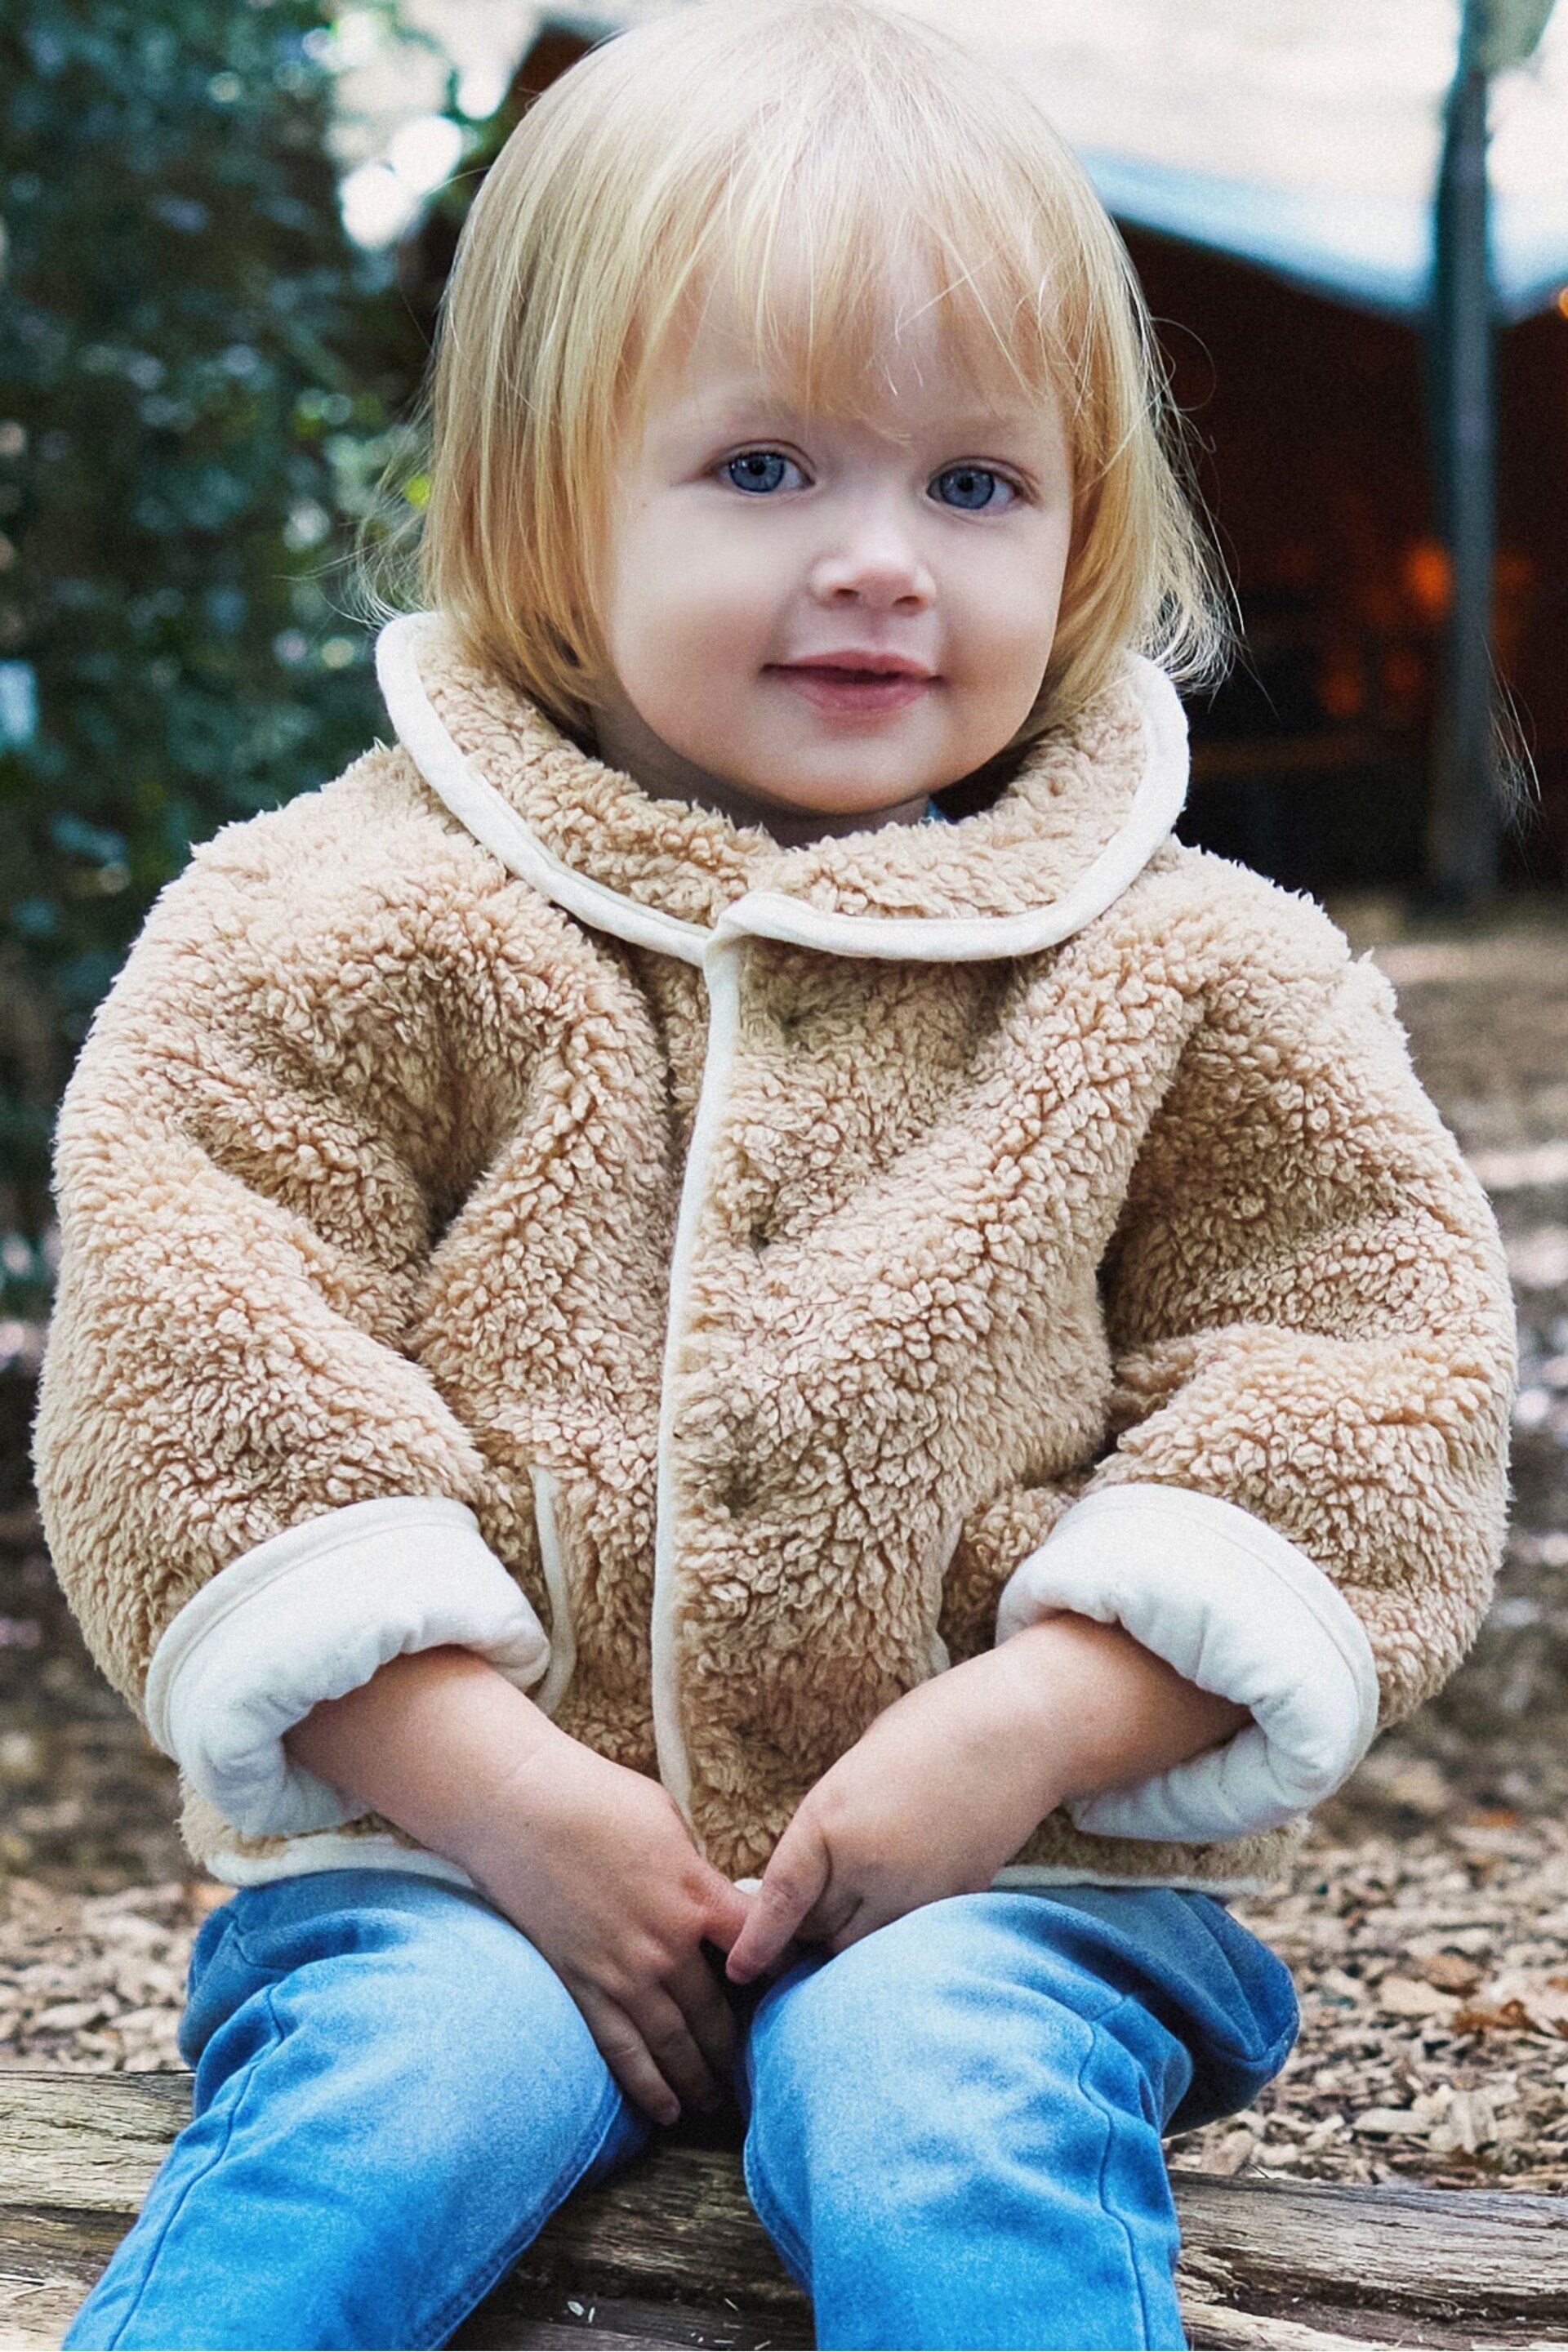 The Little Tailor Baby Natural Quilted Reversible Plush Lined Sherpa Fleece Jacket - Image 7 of 8